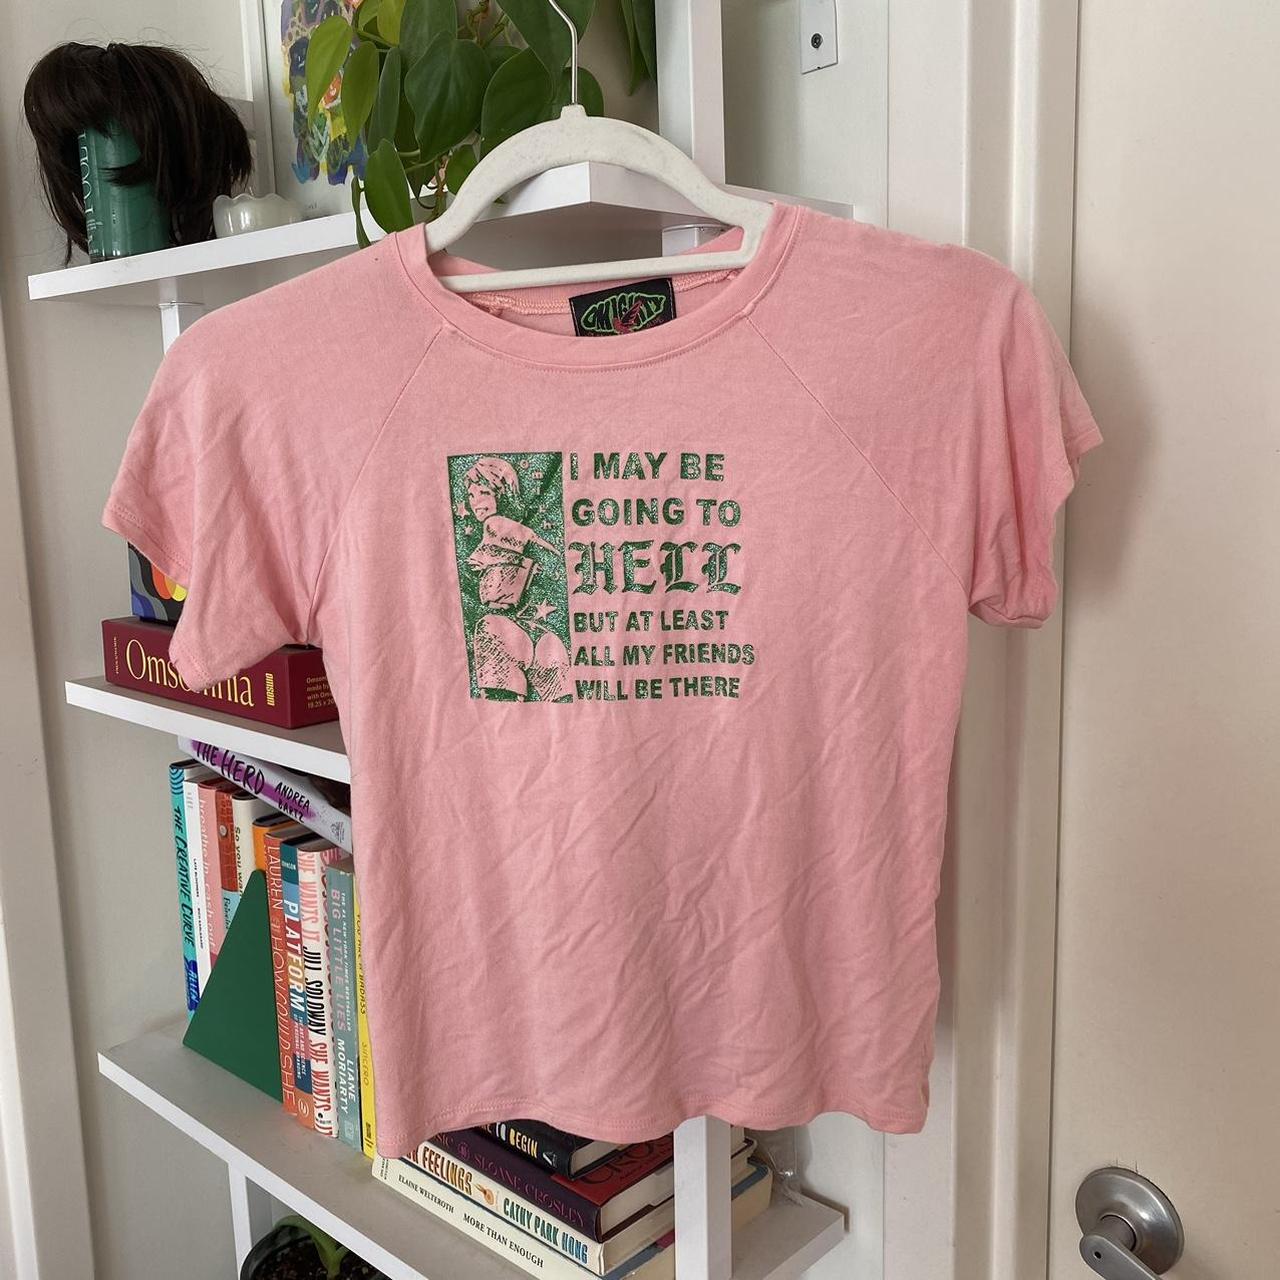 O-MIGHTY Women's Pink and Green T-shirt